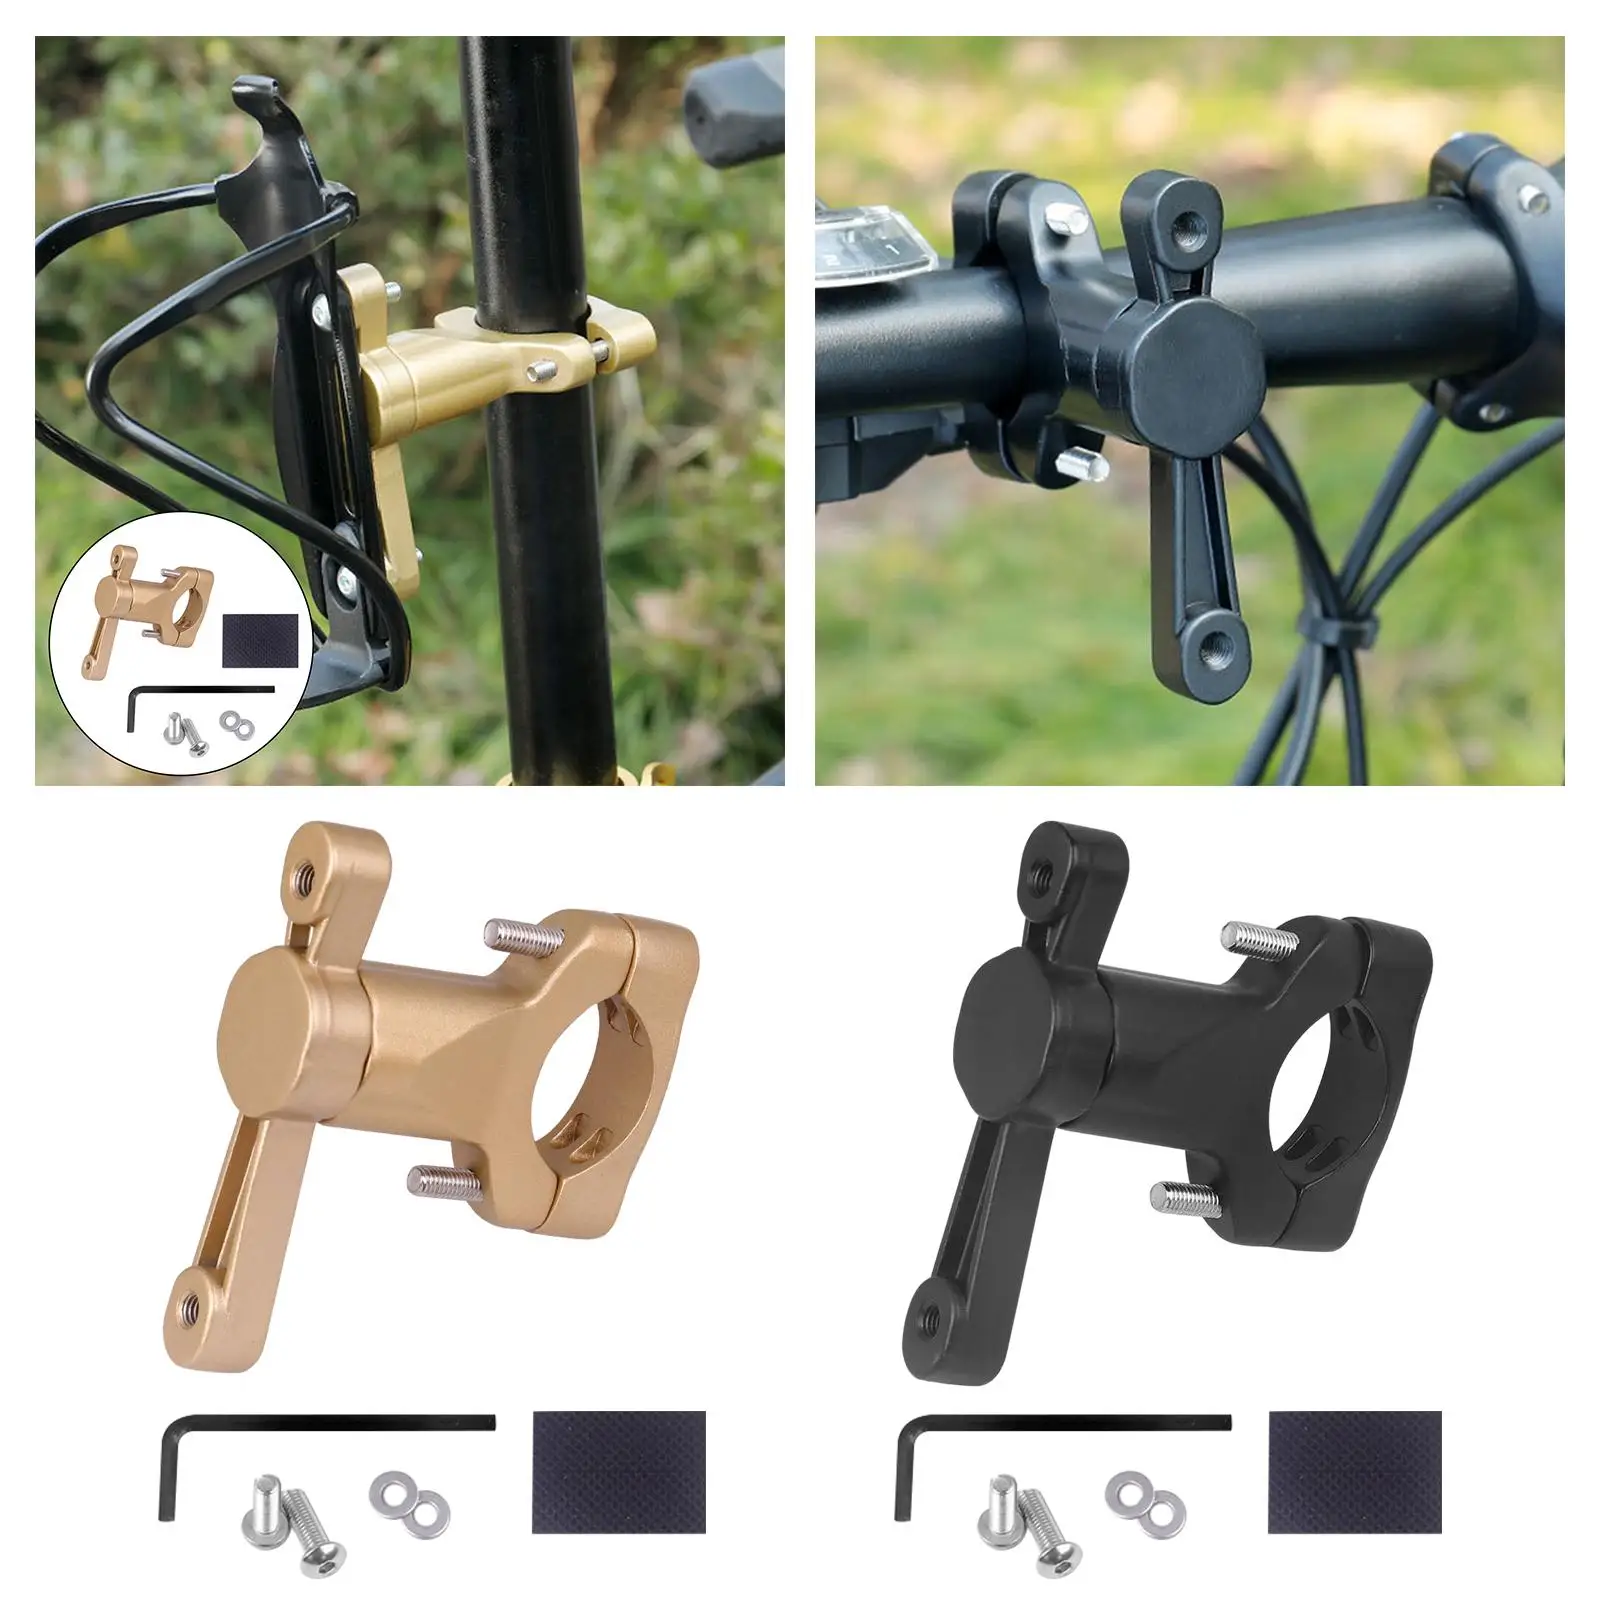 Bicycle Bottle Cage Rack Holder Adapter, Mountain MTB Bikes Drinking Cage